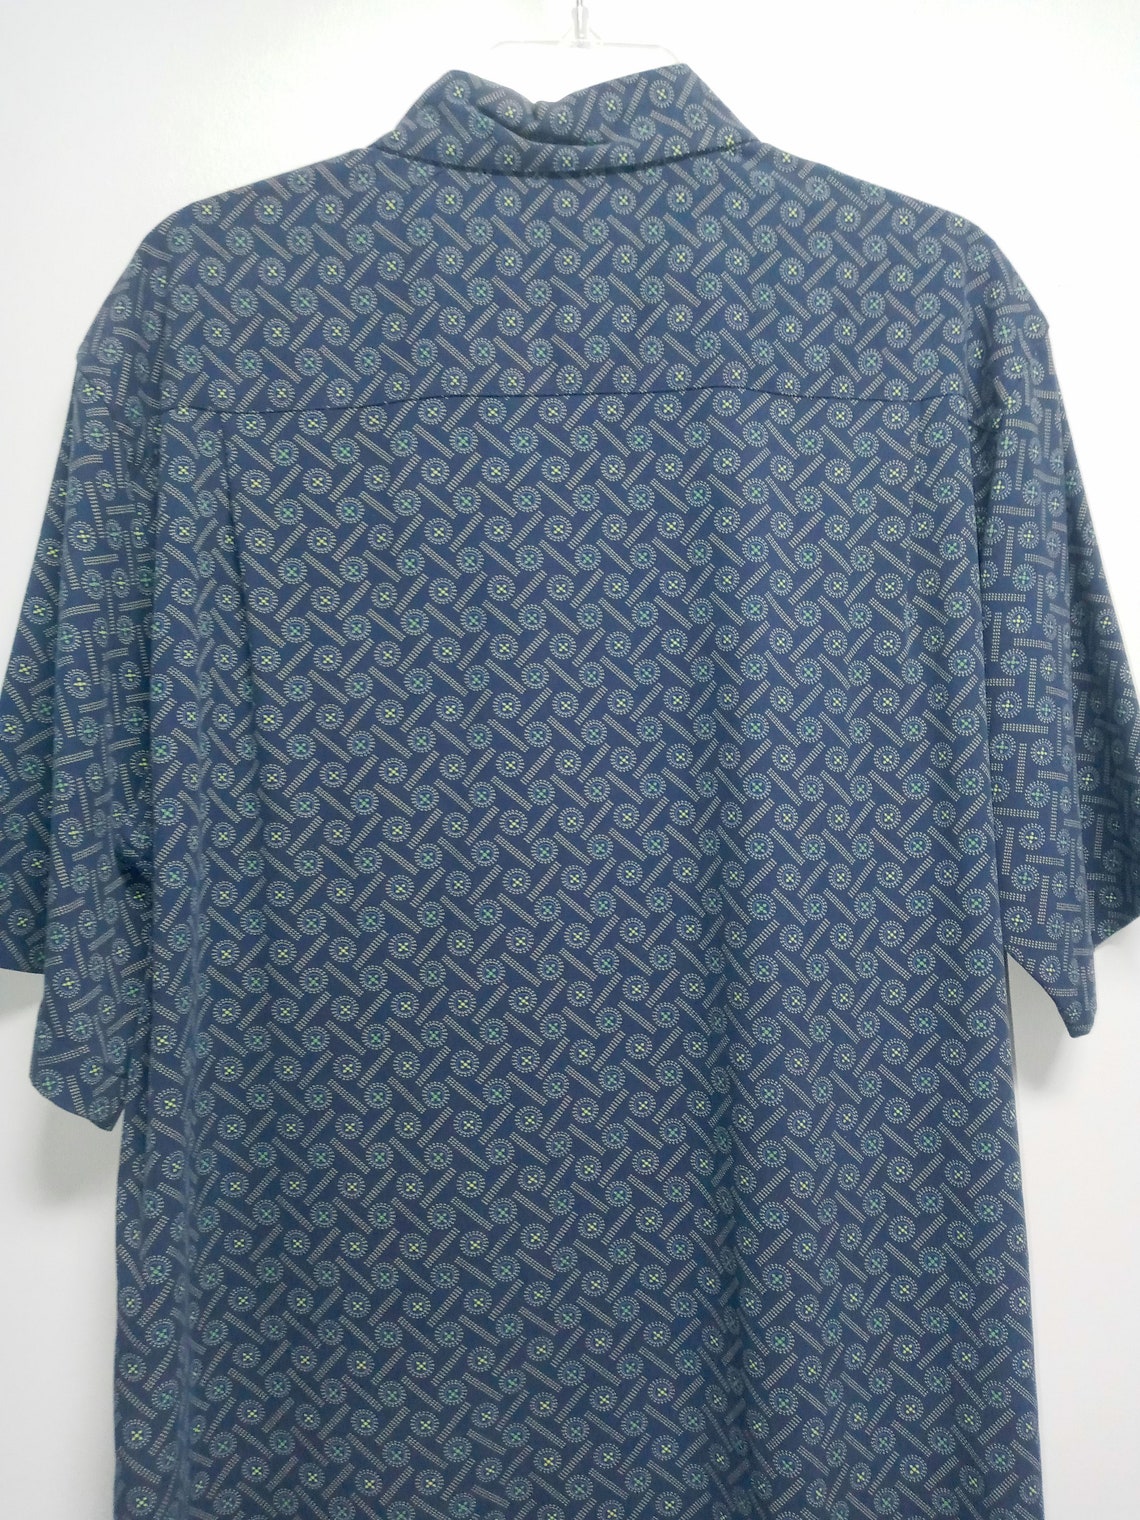 Vintage Short Sleeve Shirt by TOSCANO 100% Silk Tags on Never - Etsy